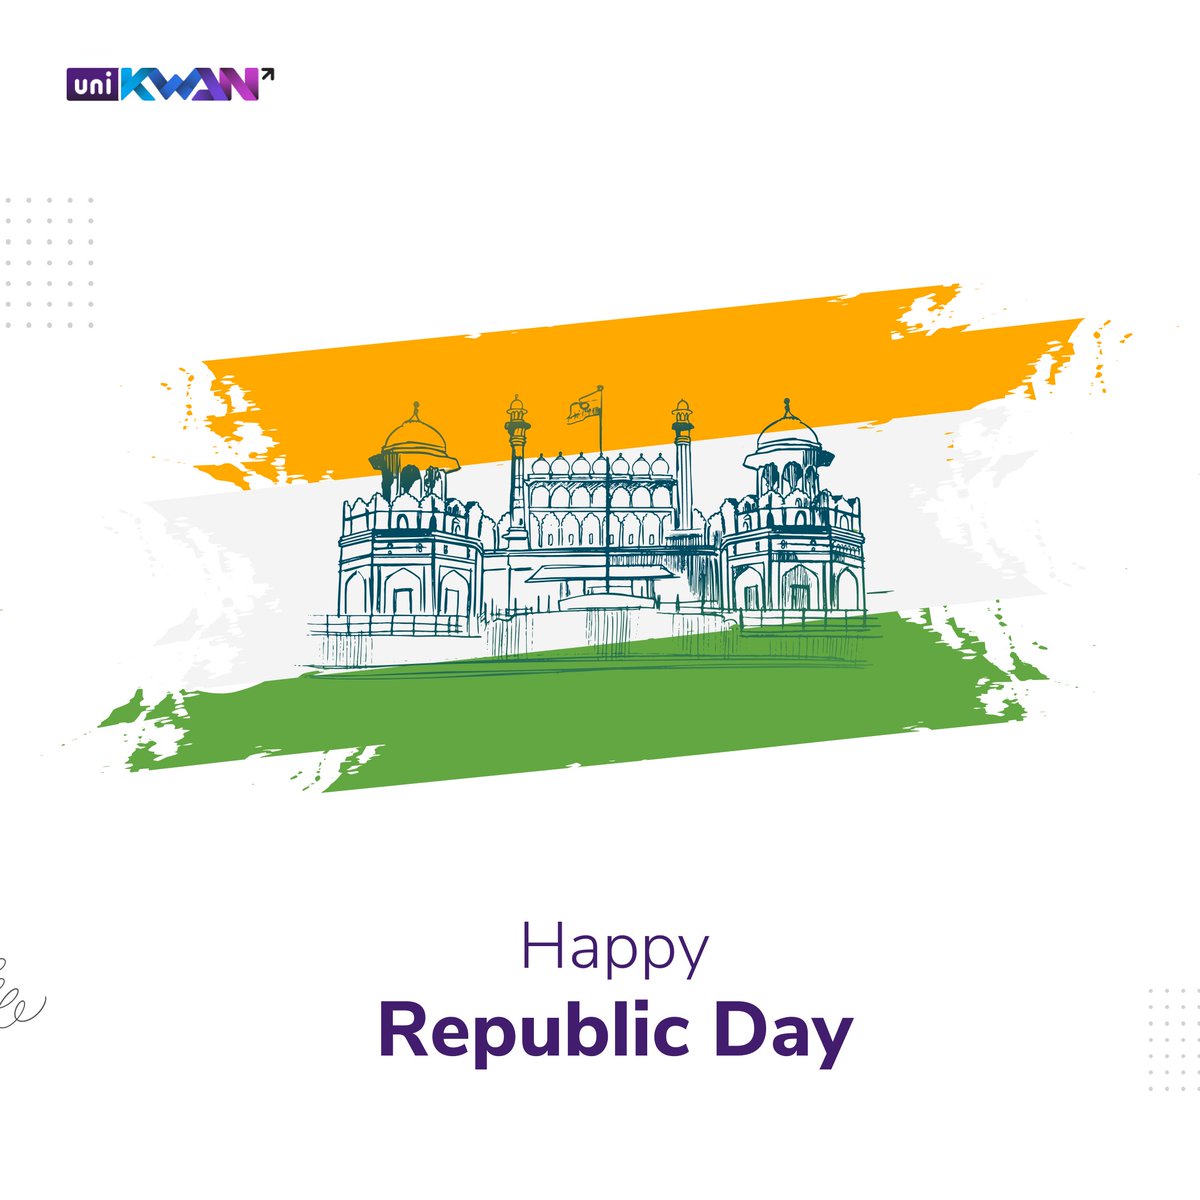 Team UniKwan wishes you all a very Happy Republic Day! 🇮🇳✨ #republicday #republicdayindia #india #republicday2023